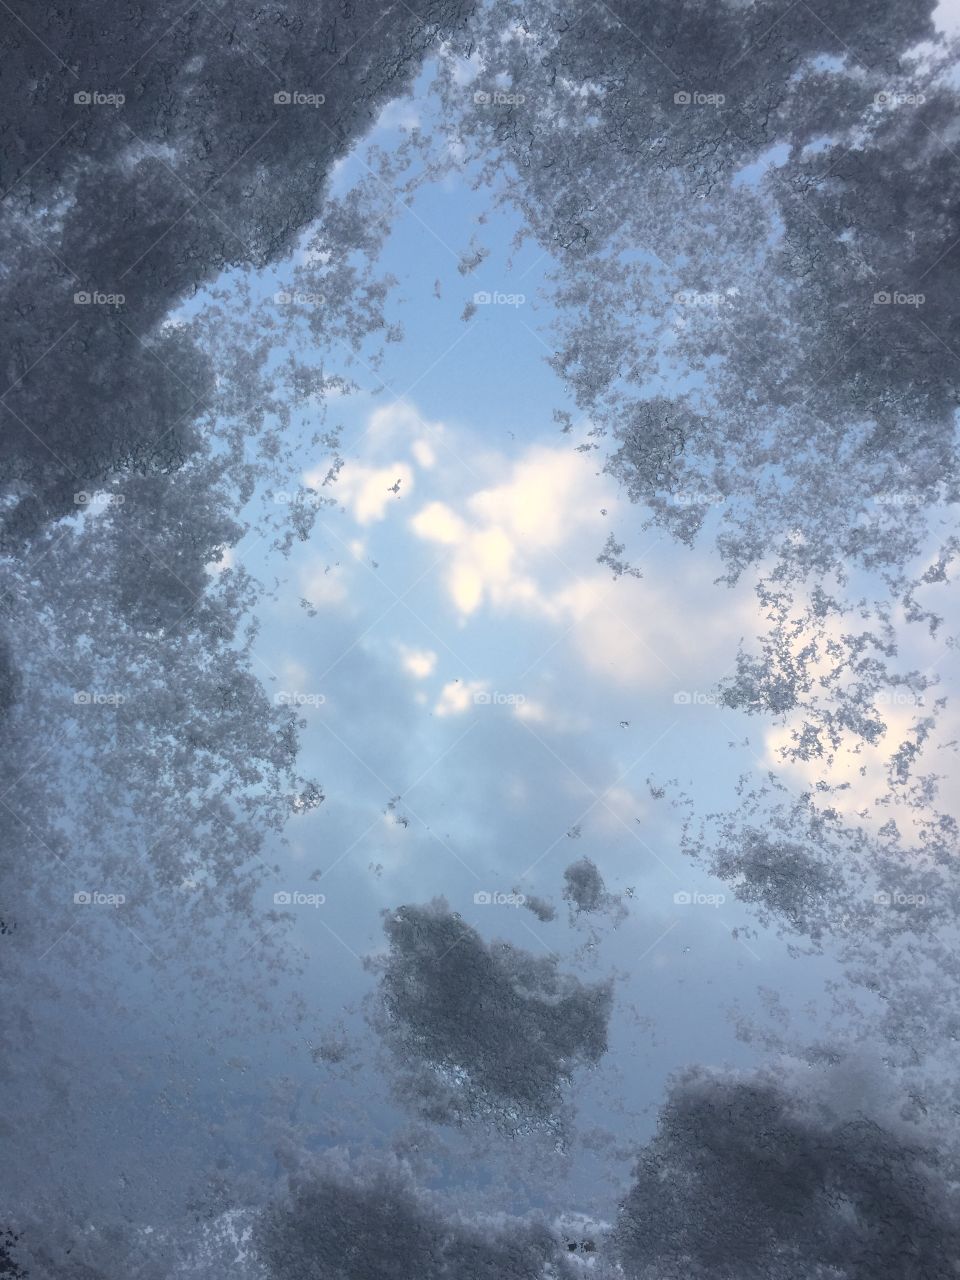 Clouds throw a snowed-in window